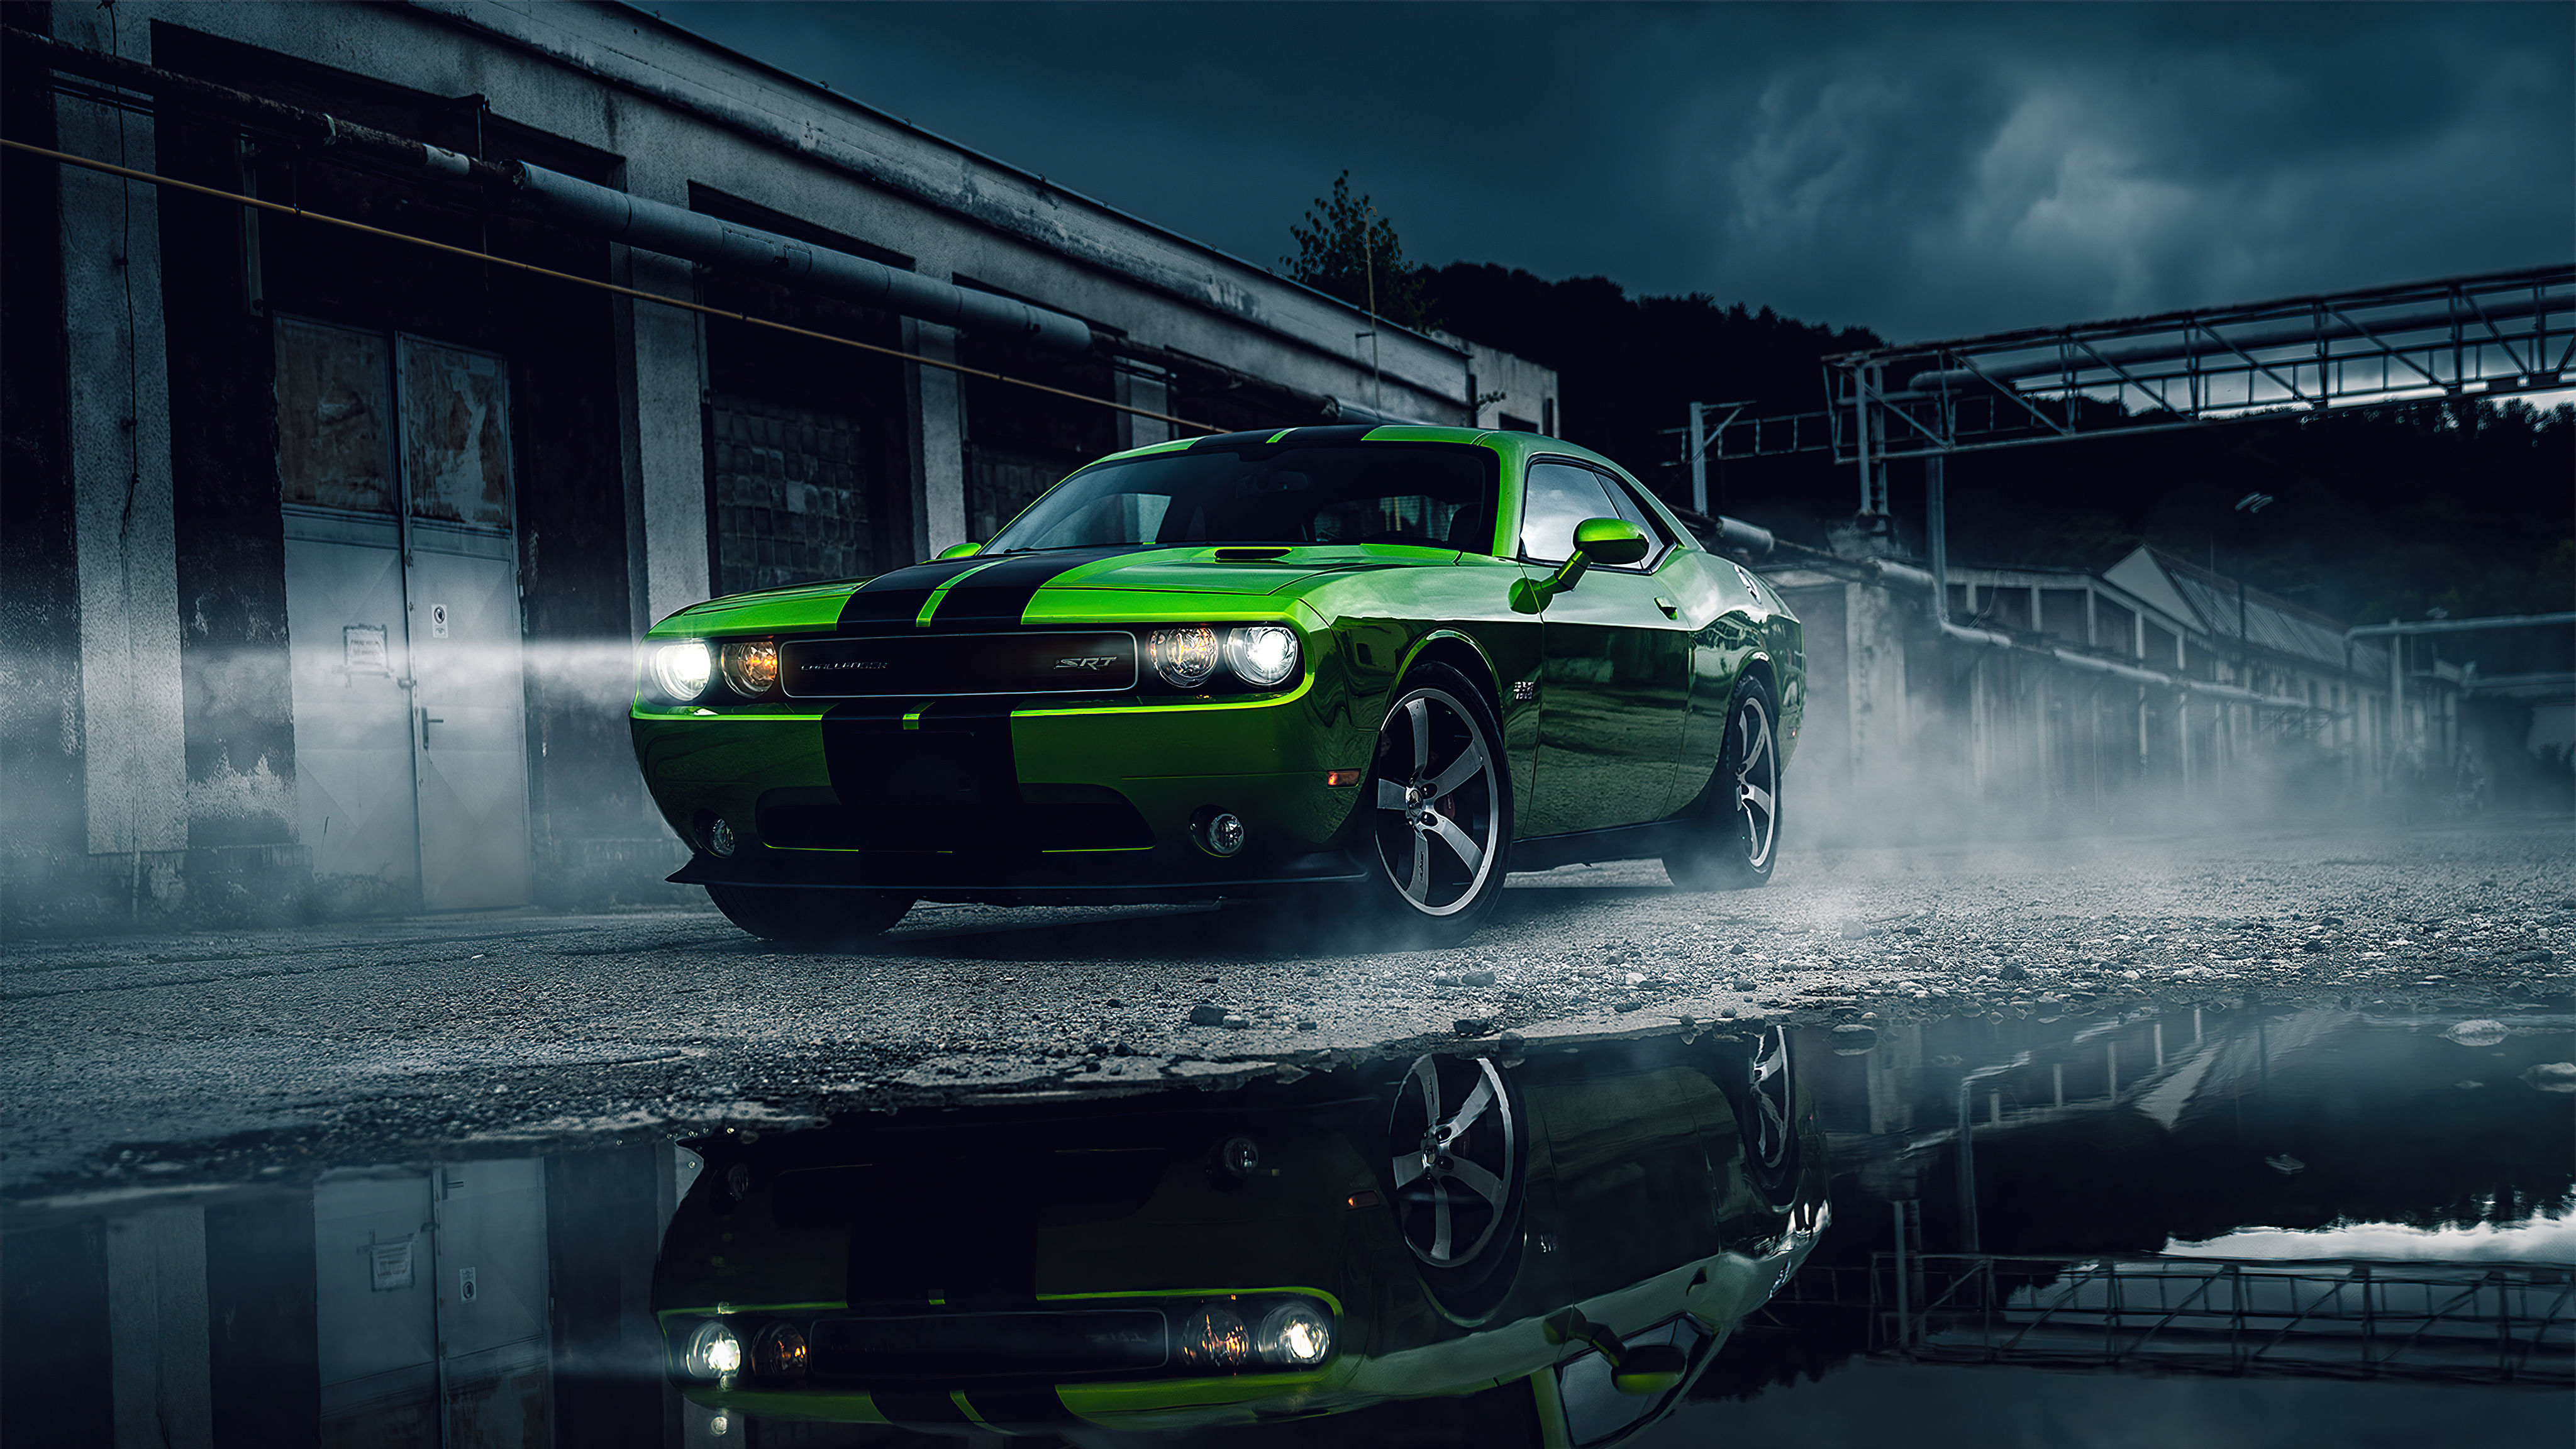 A green Dodge Challenger on a foggy evening.